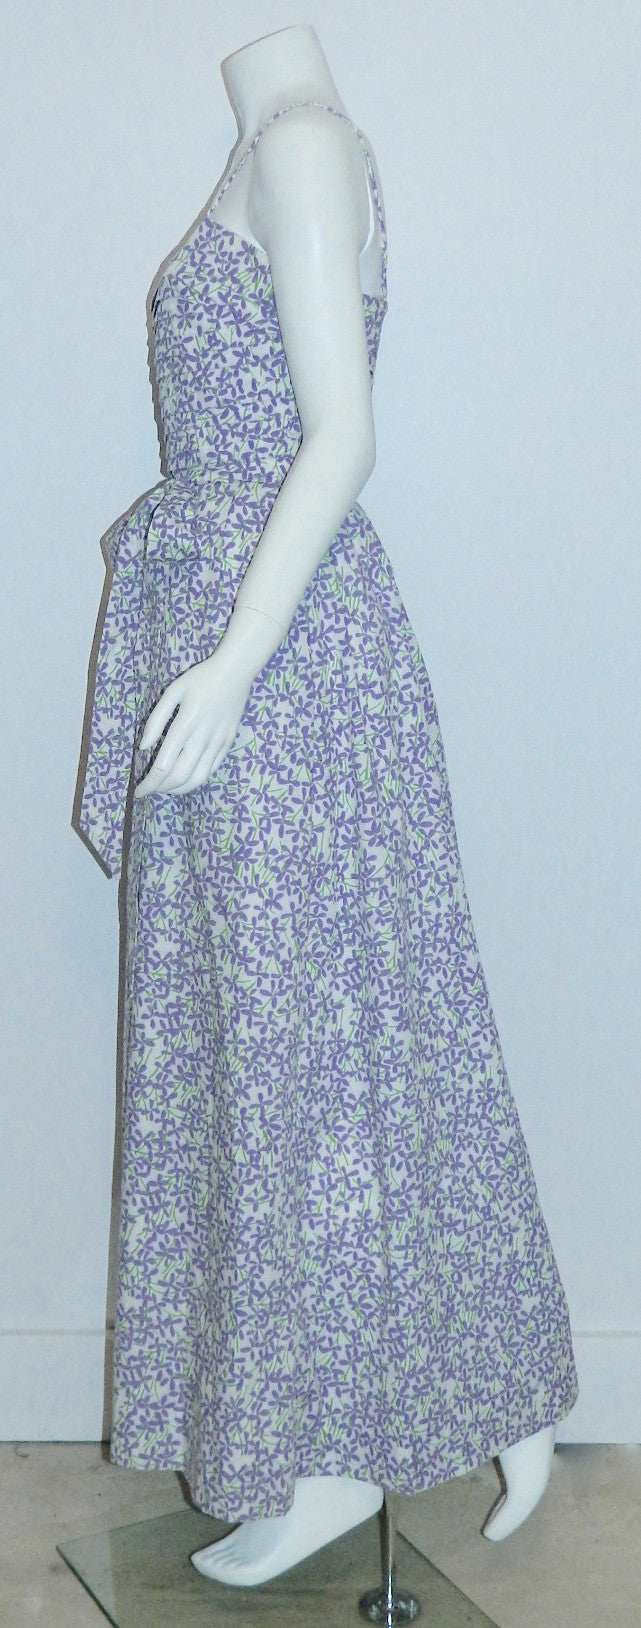 vintage Lilly Pulitzer dress 1970s purple floral gown maxi sundress XS - S